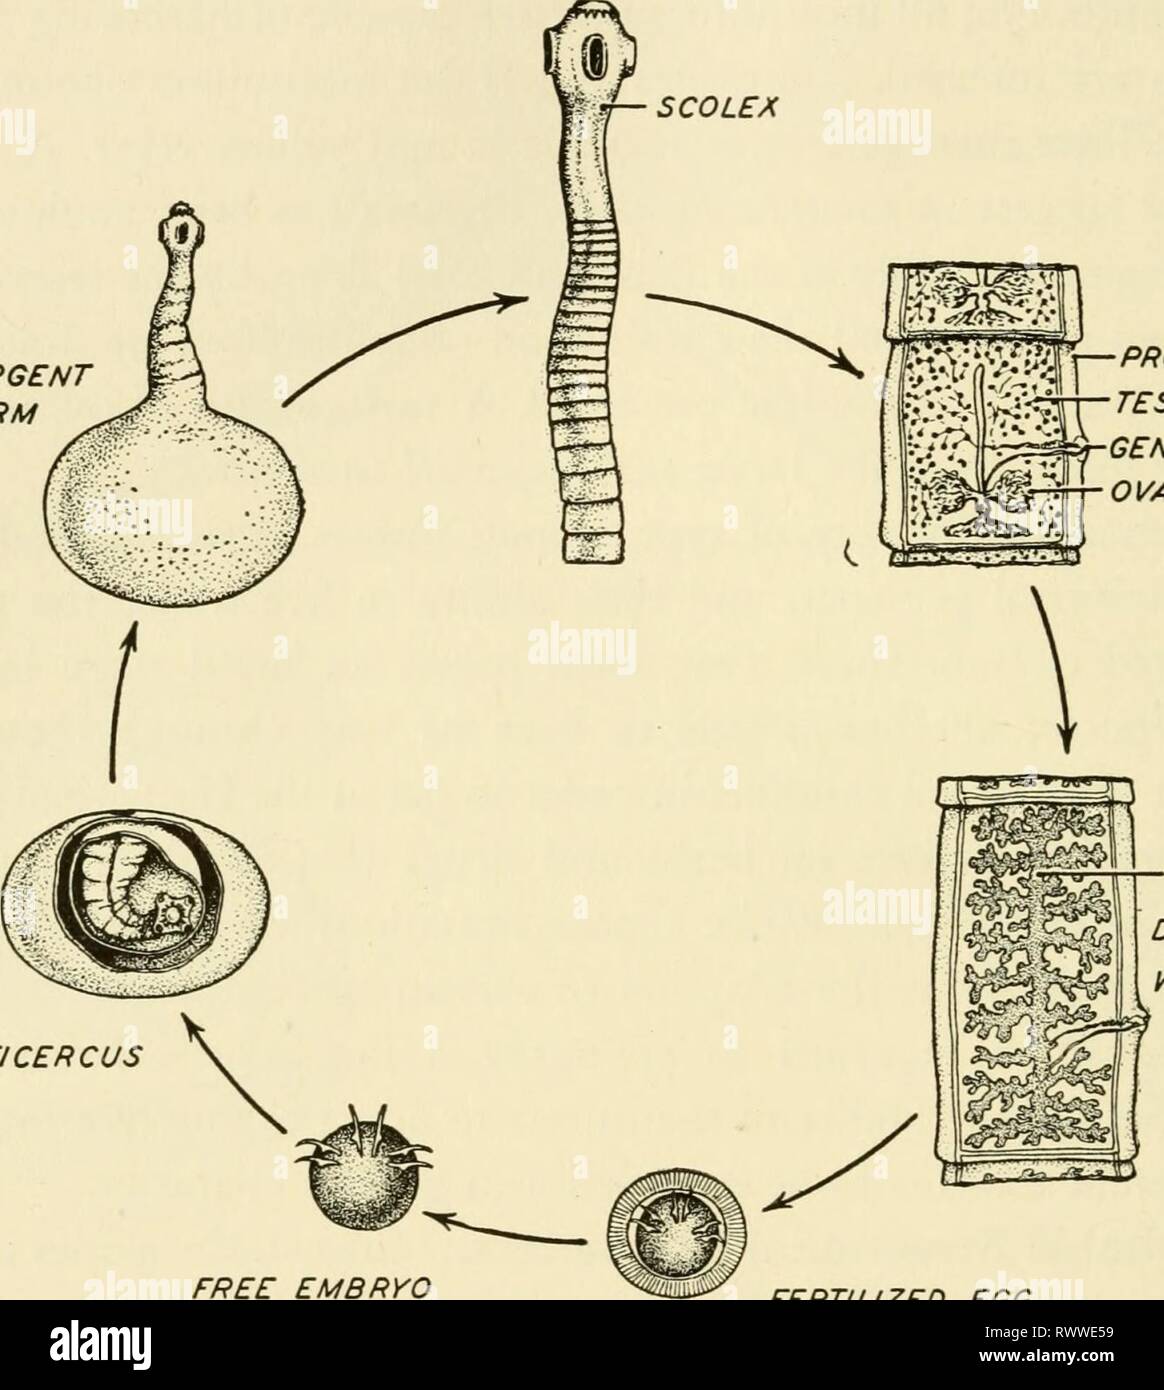 Elements of biology, with special Elements of biology, with special reference to their rôle in the lives of animals elementsofbiolog00buch Year: 1933  3^4 ELEMENTS OF BIOLOGY adult stage in the human intestine only. Such strictly limited adap- tations are frequently associated with degenerative structural changes. The tapeworm, one of the phylum Platyhelminthes, does EMERGENT FORM    PROGLOTTID TESTES GENITAL PORE OVARY CYSTICERCUS UTERUS DISTENDED WITH RIPE EGGS FREE EMBRYO FERTILIZED EGG Fig. 218.—Diao^rammatic representation of the life cycle of the human tape worm, Tcenia solium. (Partly a Stock Photo